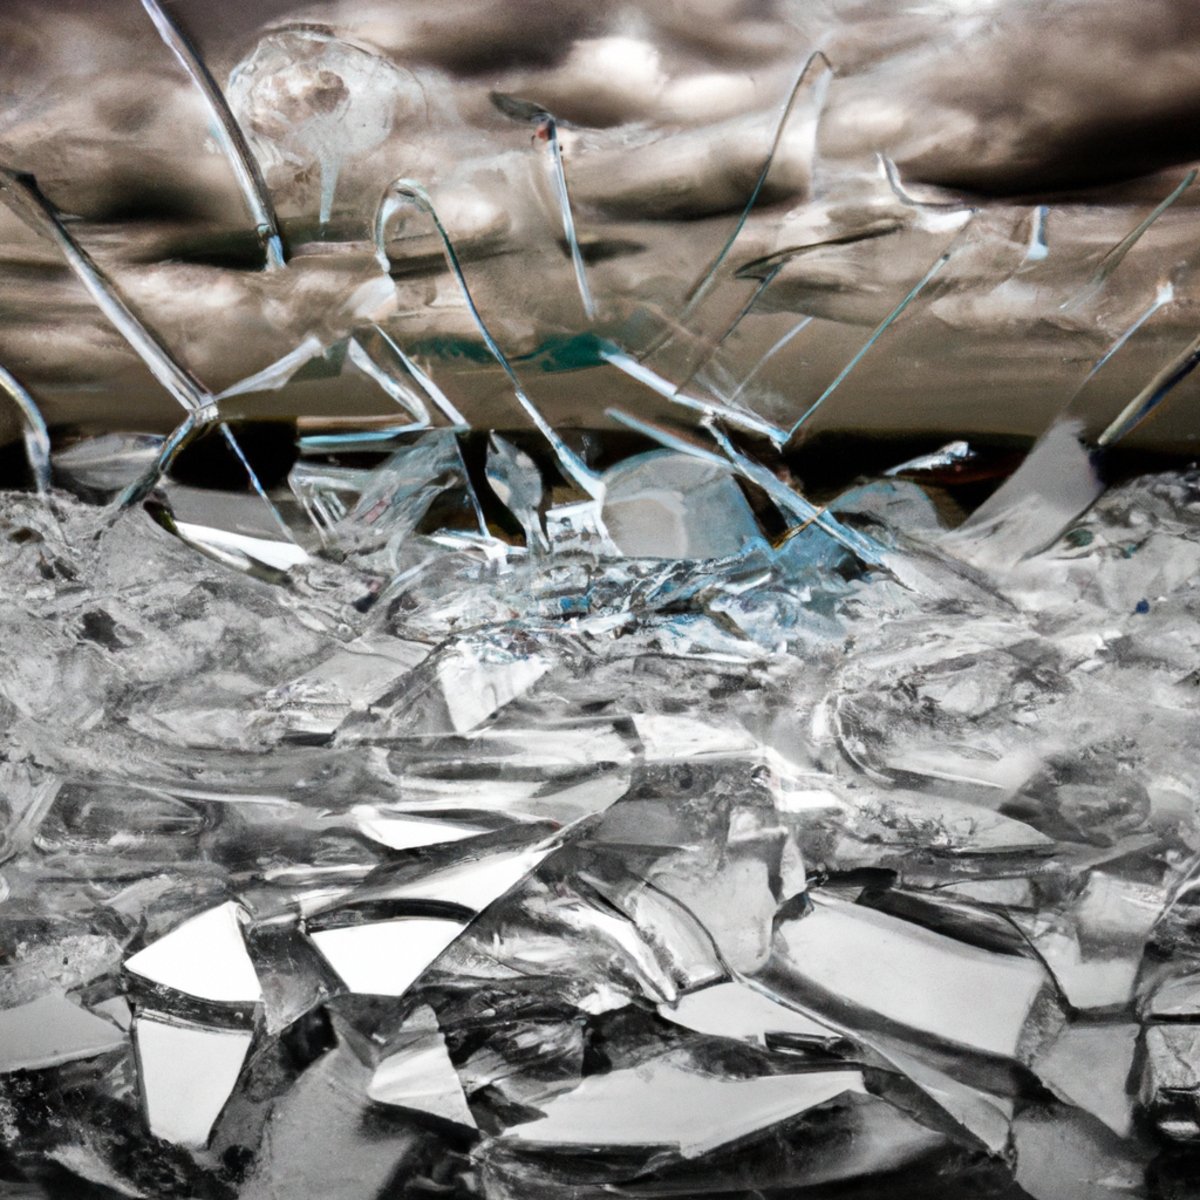 Shattered glass window on a dark floor, under a stormy sky.